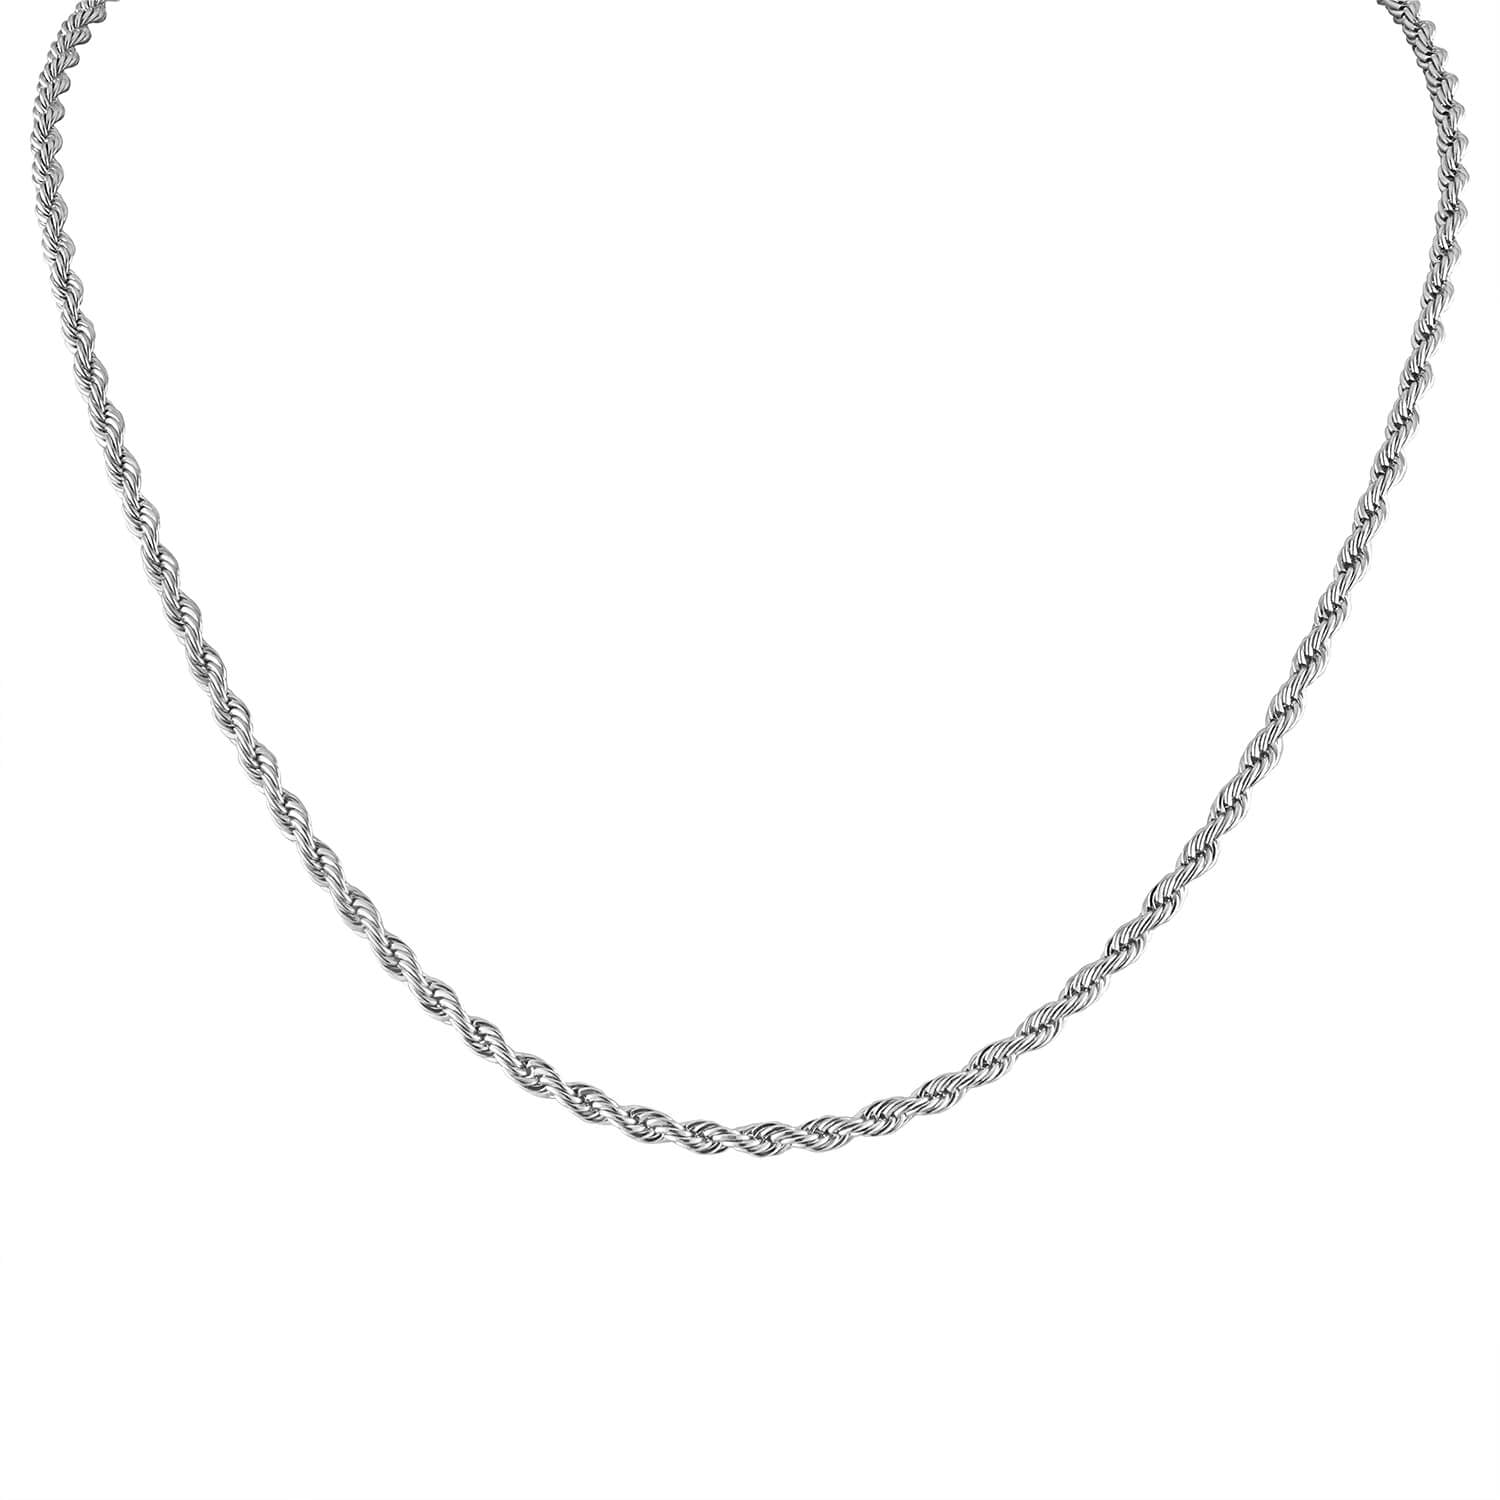 Heirloom Necklace in Silver